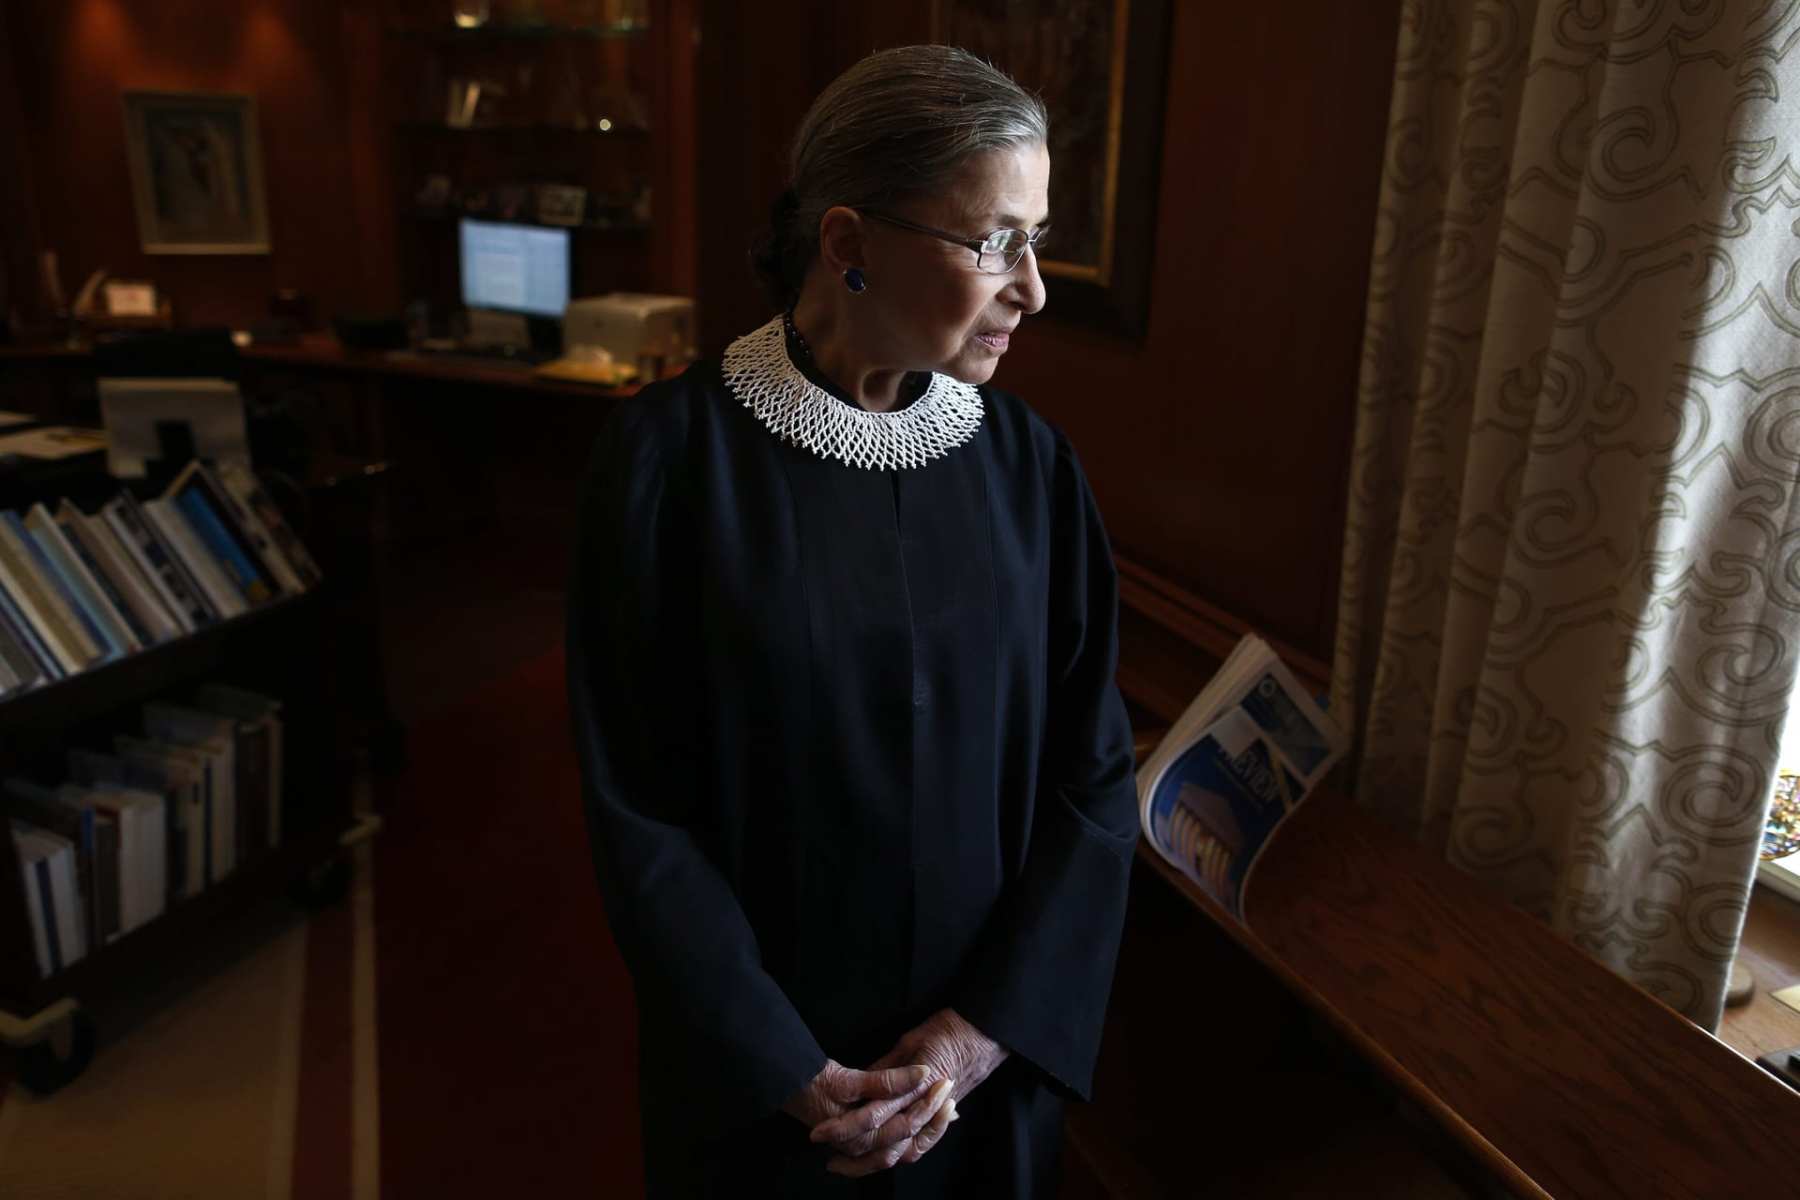 Associate Justice Ruth Bader Ginsburg poses for a photo in her chambers at the Supreme Court in Washington, Wednesday, July 24, 2013, before an interview with the Associated Press. Ginsburg said during the interview that it was easy to foresee that Southern states would push ahead with tougher voter identification laws and other measures once the Supreme Court freed them from strict federal oversight of their elections.